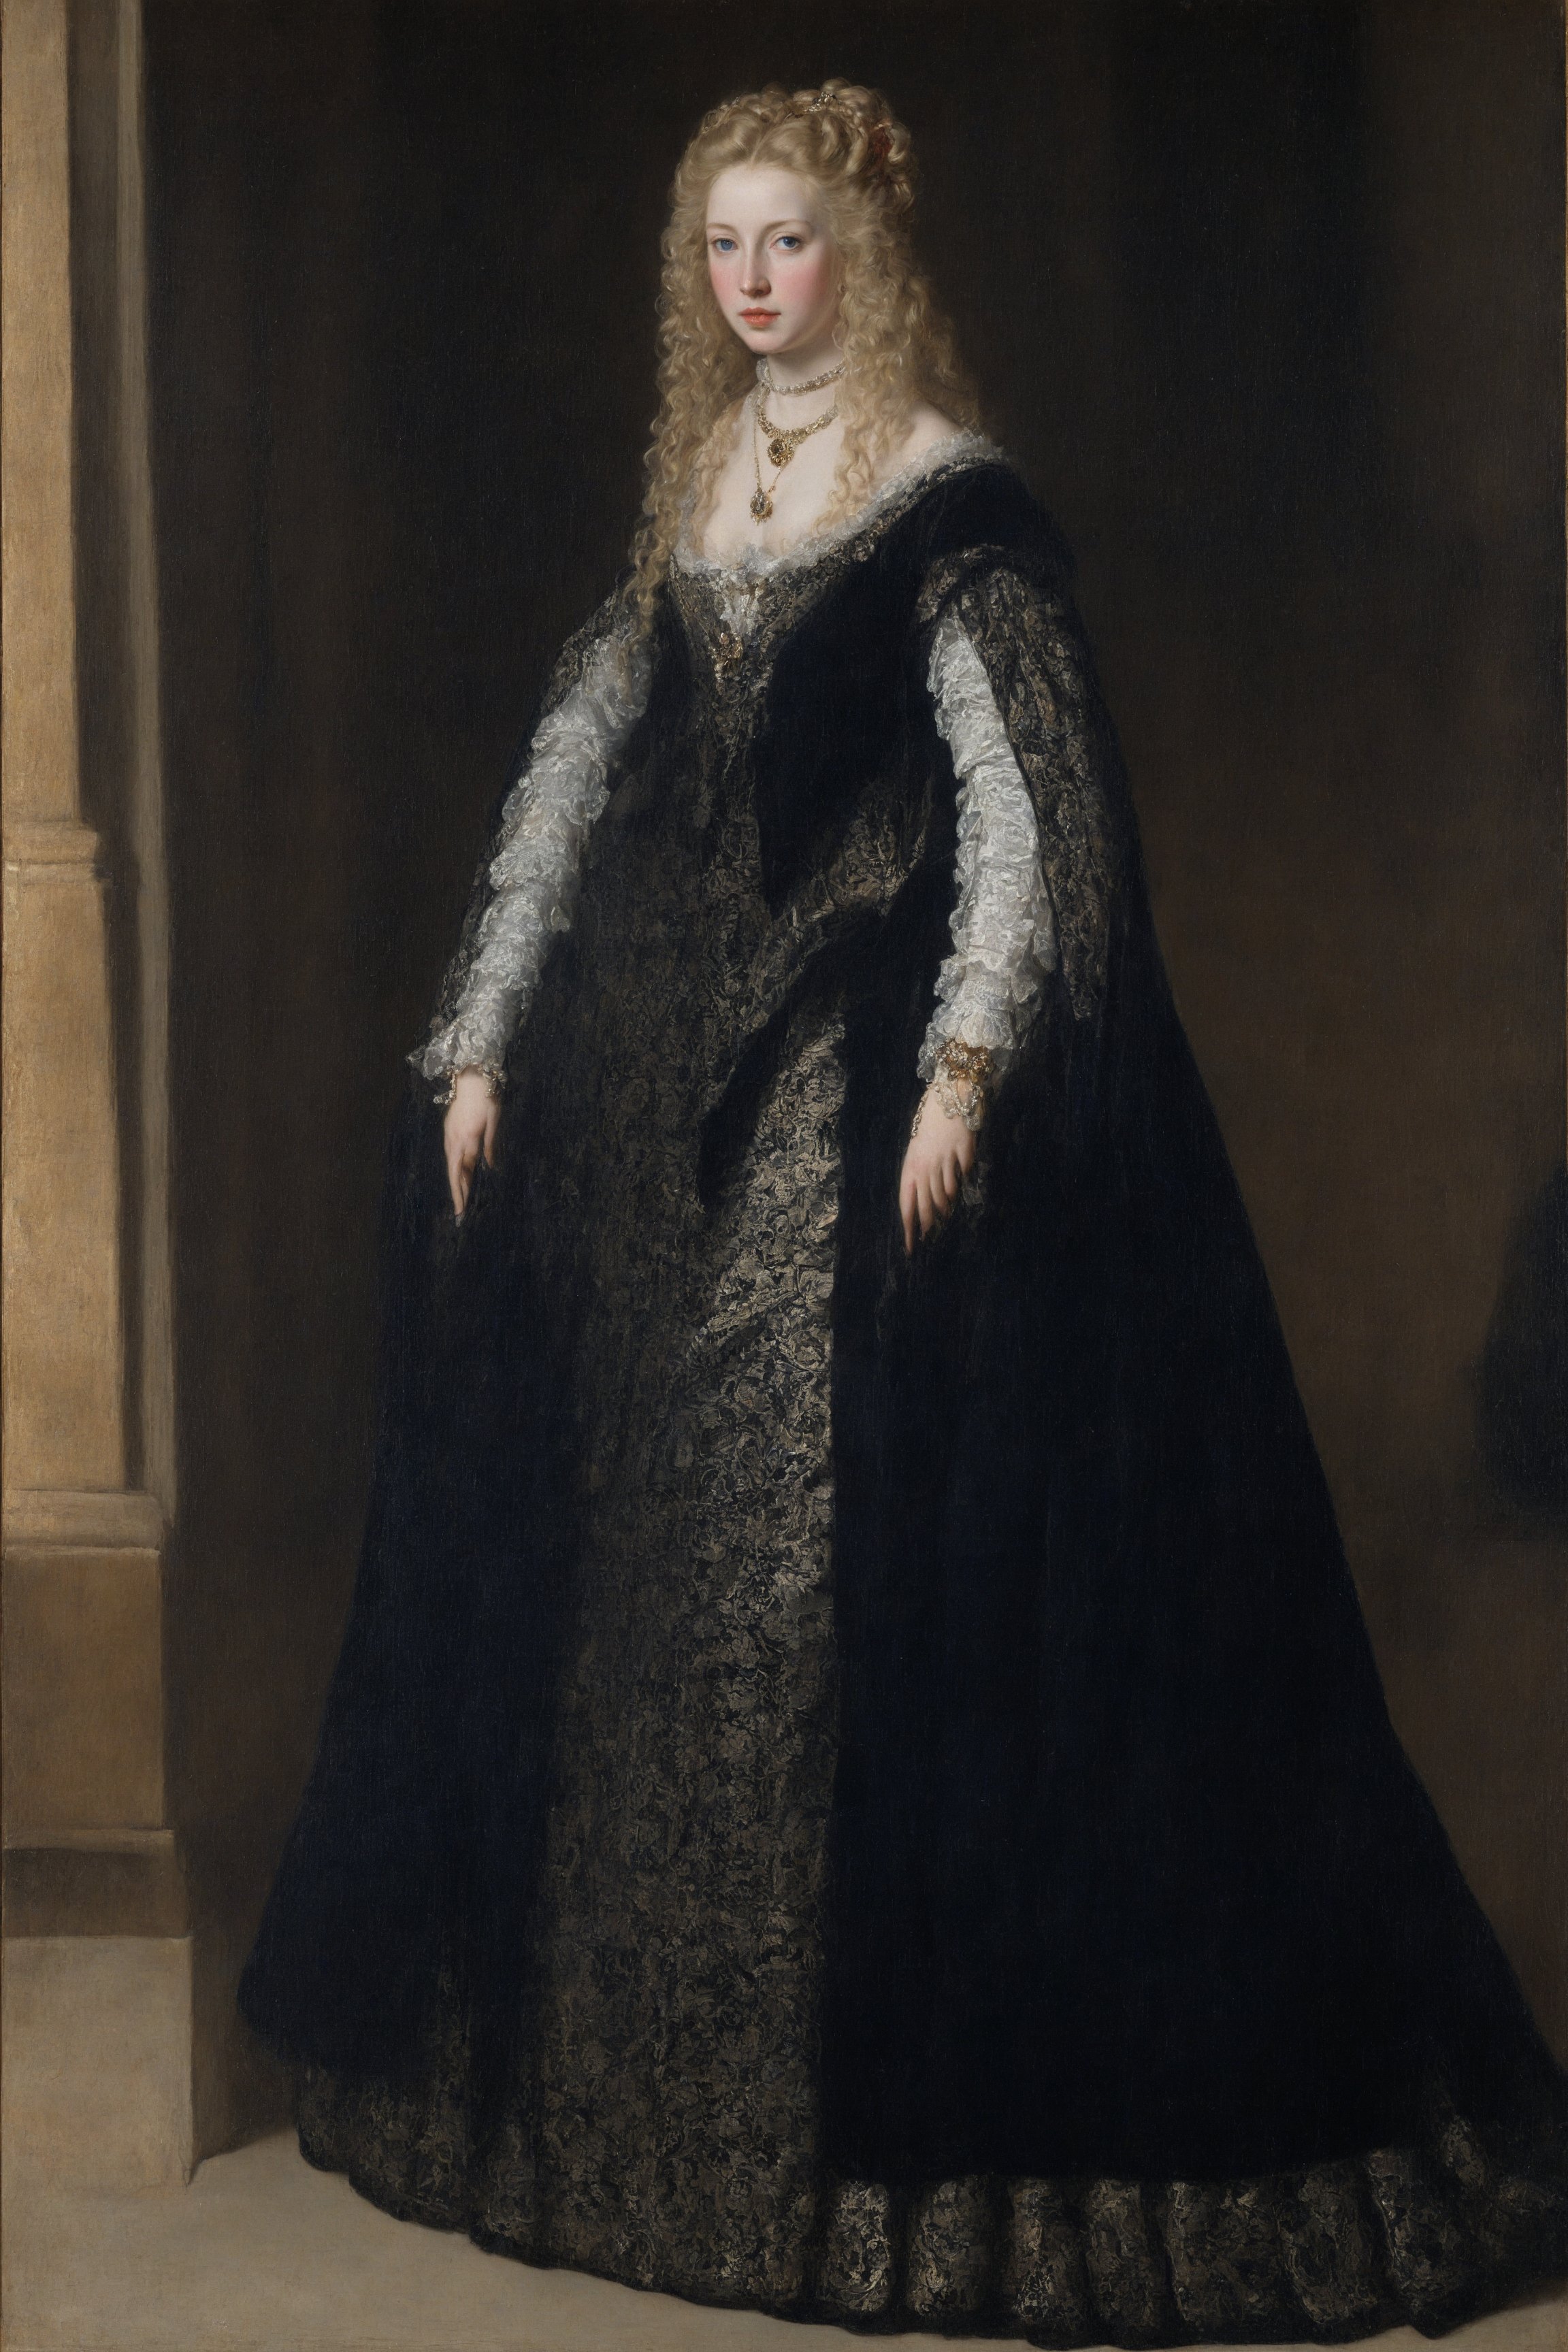 A 17th-century beauty, resplendent in fine attire, stands poised before a rich, dark backdrop. Her piercing blue eyes sparkle under golden locks as she meets the viewer's gaze. Delicate lace at her neckline is grasped by slender fingers, adorned with intricate jewelry. Soft, golden light caresses her porcelain skin, with subtle shadows accentuating facial curves. Ornate drapery frames her against a somber background, exuding luxury and sophistication. Velazquez's masterful brushstrokes bring to life this baroque oil on canvas portrait, bathed in chiaroscuro's dramatic glow.